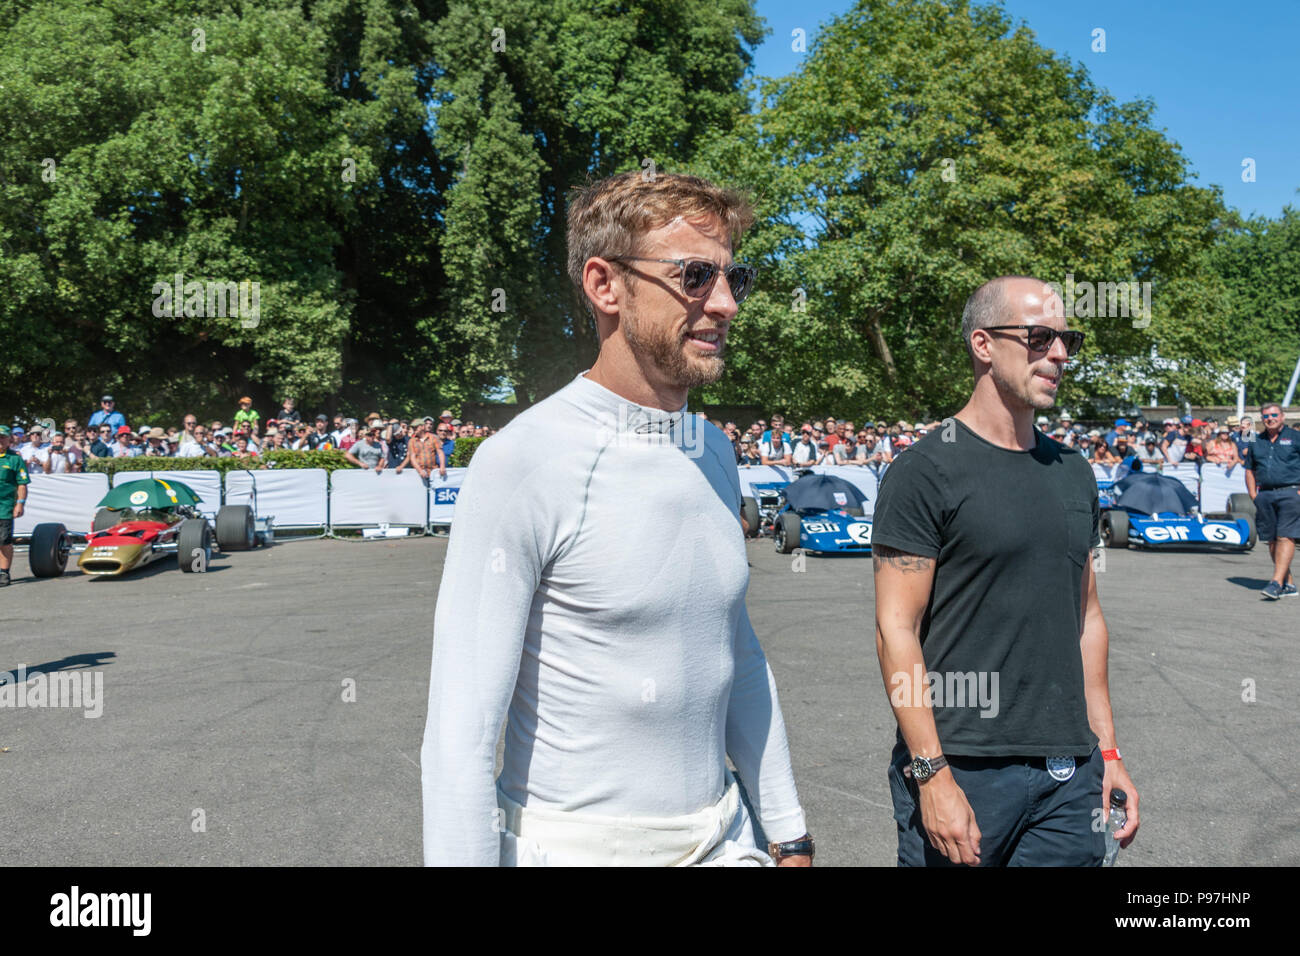 Goodwood Festival of Speed, West Sussex, UK. 15th July 2018. Celebrating 25 years, Silver Jubilee. Jenson Button, World Champion Formula One driverr. © Gillian Downes/AlamyLive News Stock Photo